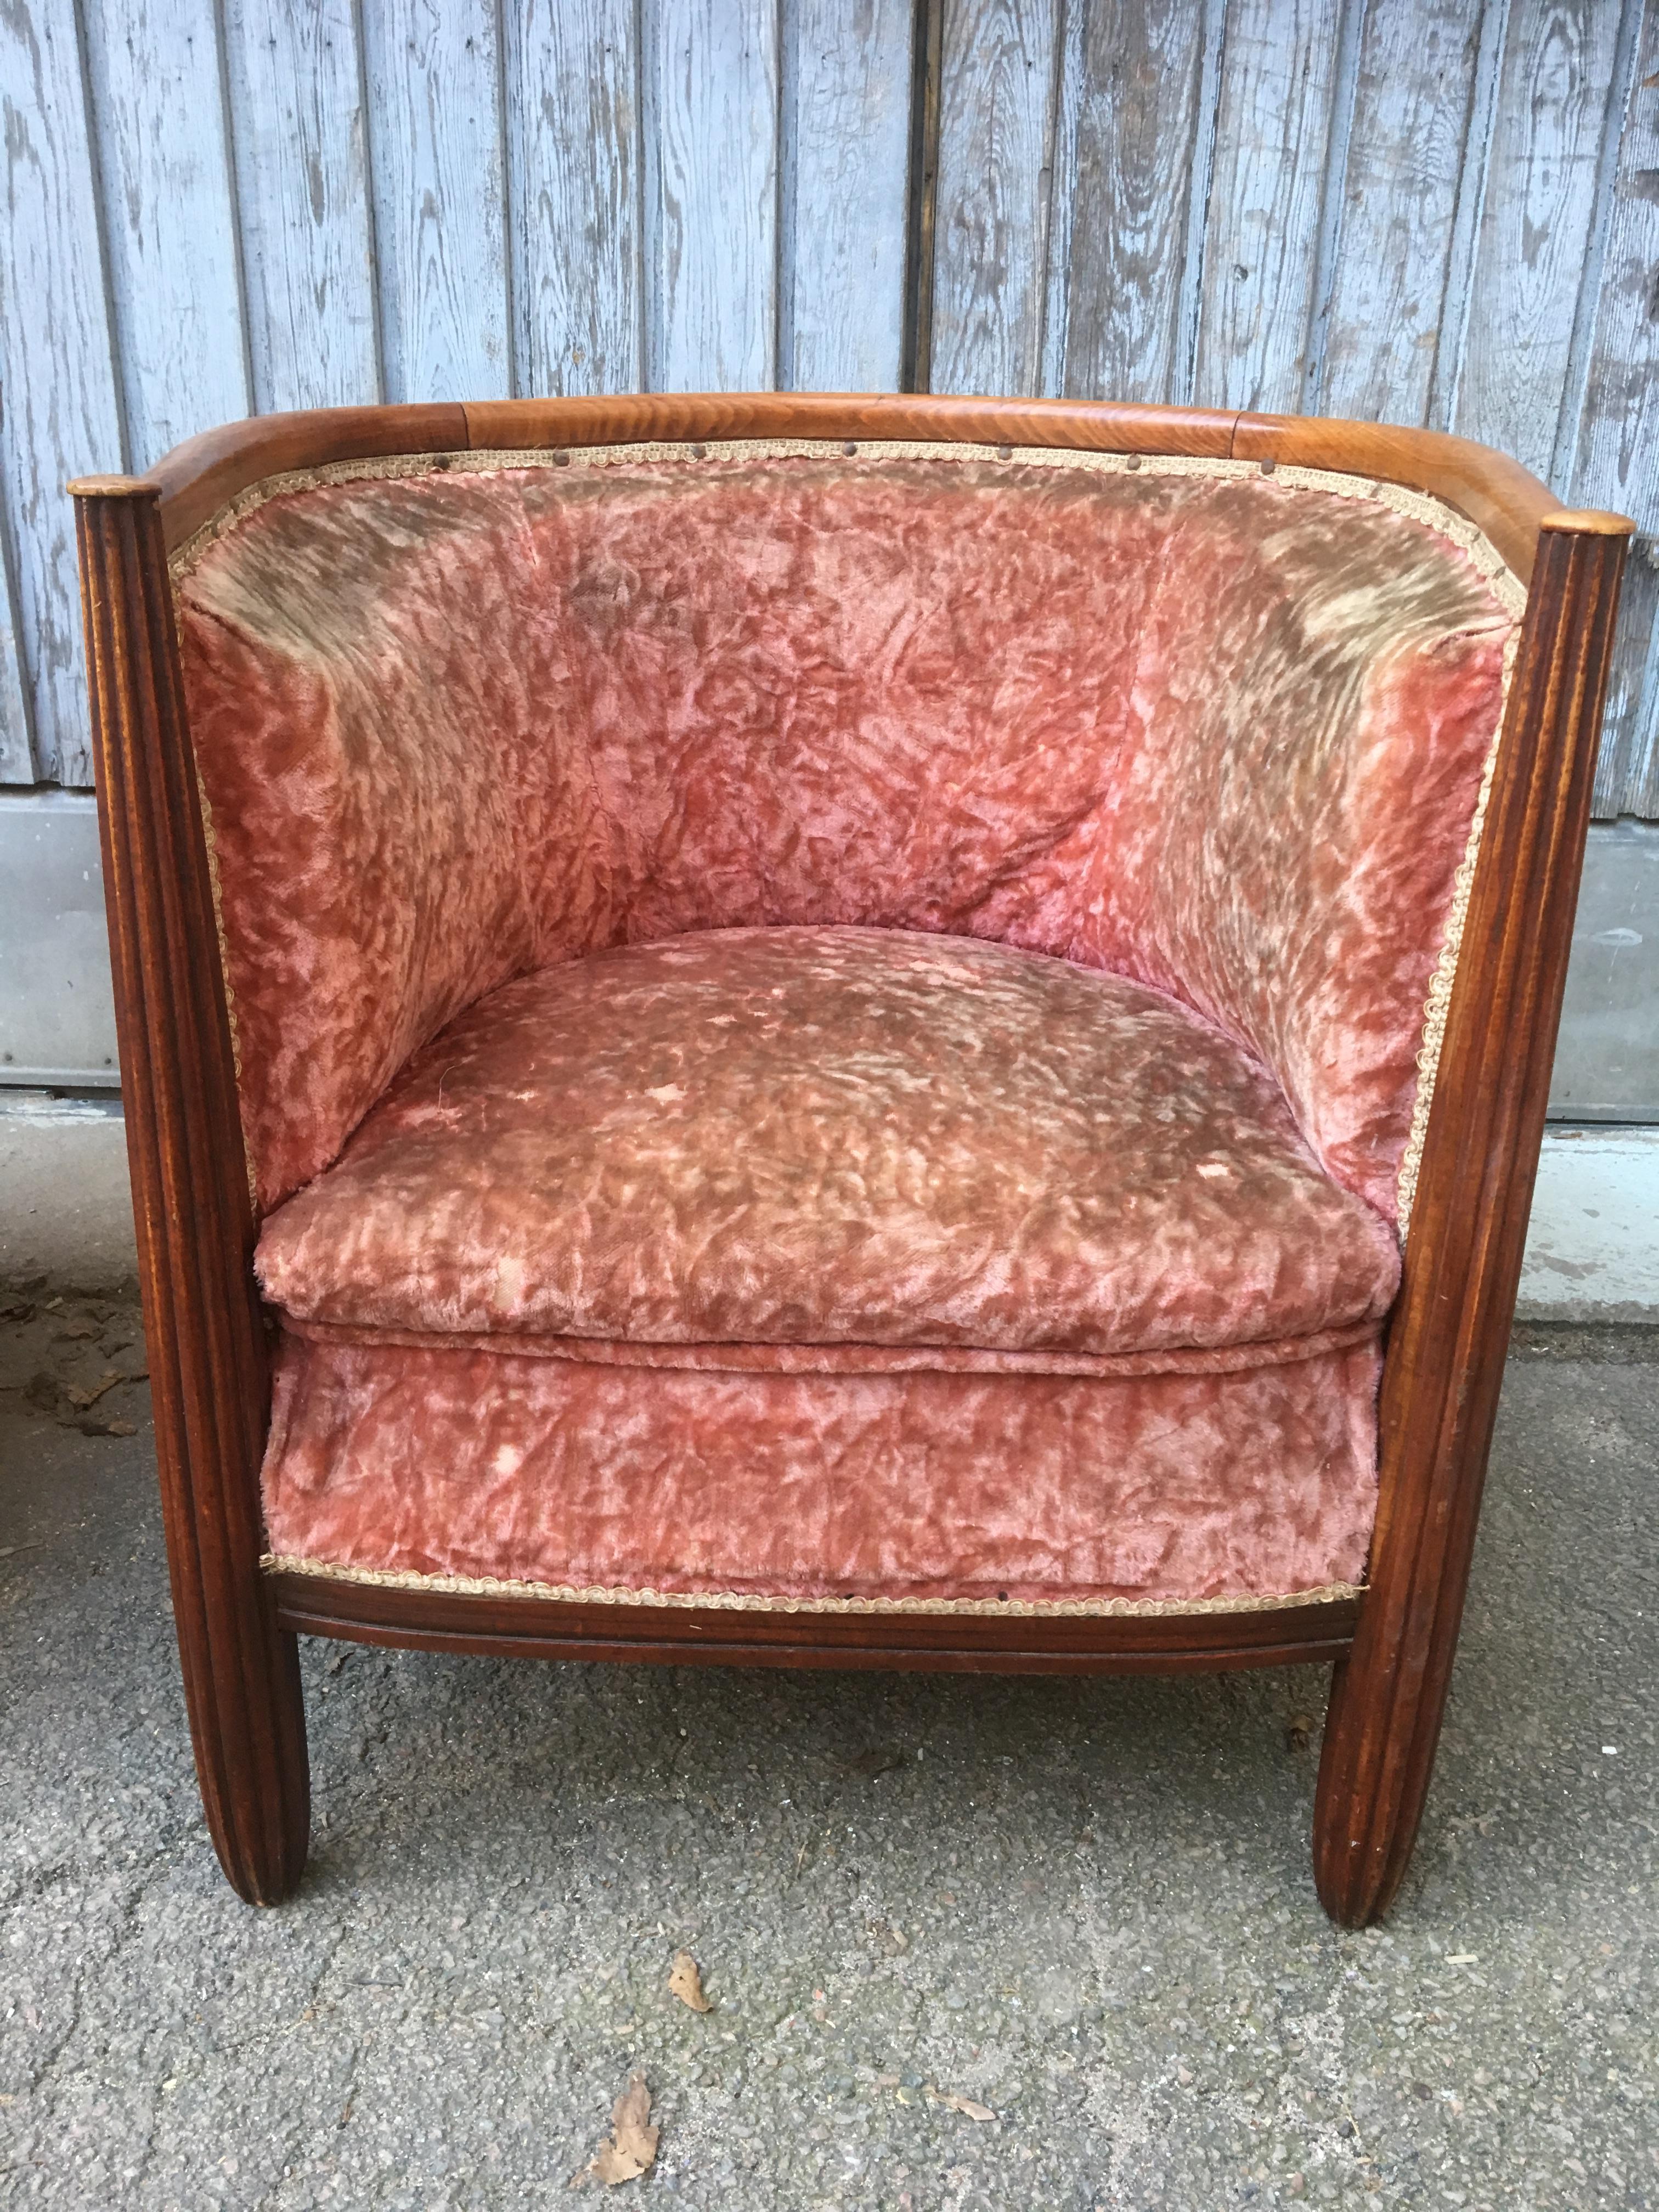 Pair of French Art Deco Barrel Club Chairs in Original Pink Velvet Fabric 1